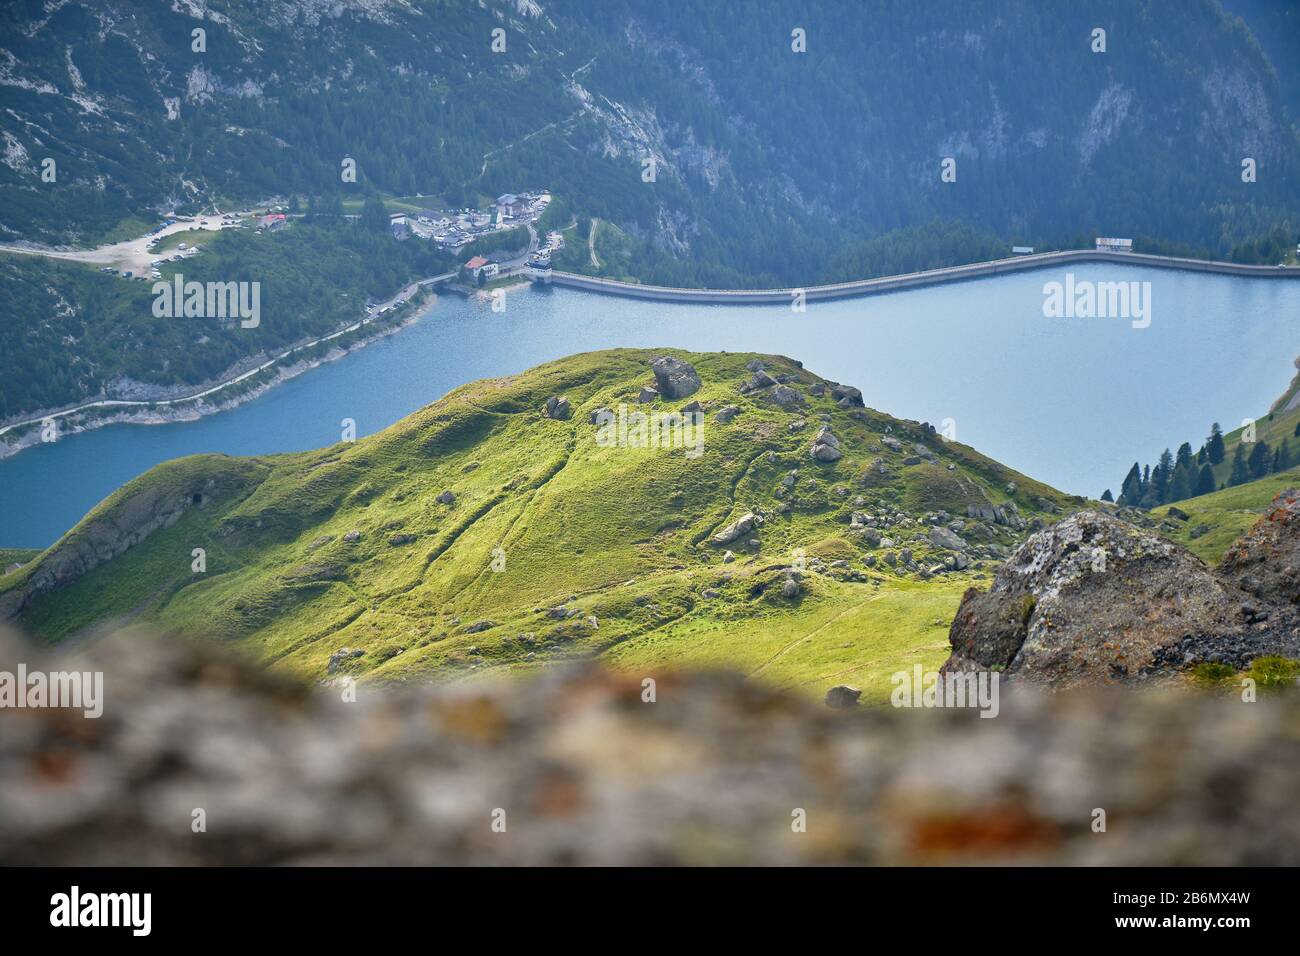 Sun patches on green hill above Fedaia Lake in Dolomites mountains, Italy, as seen from a hiking route above. Stock Photo